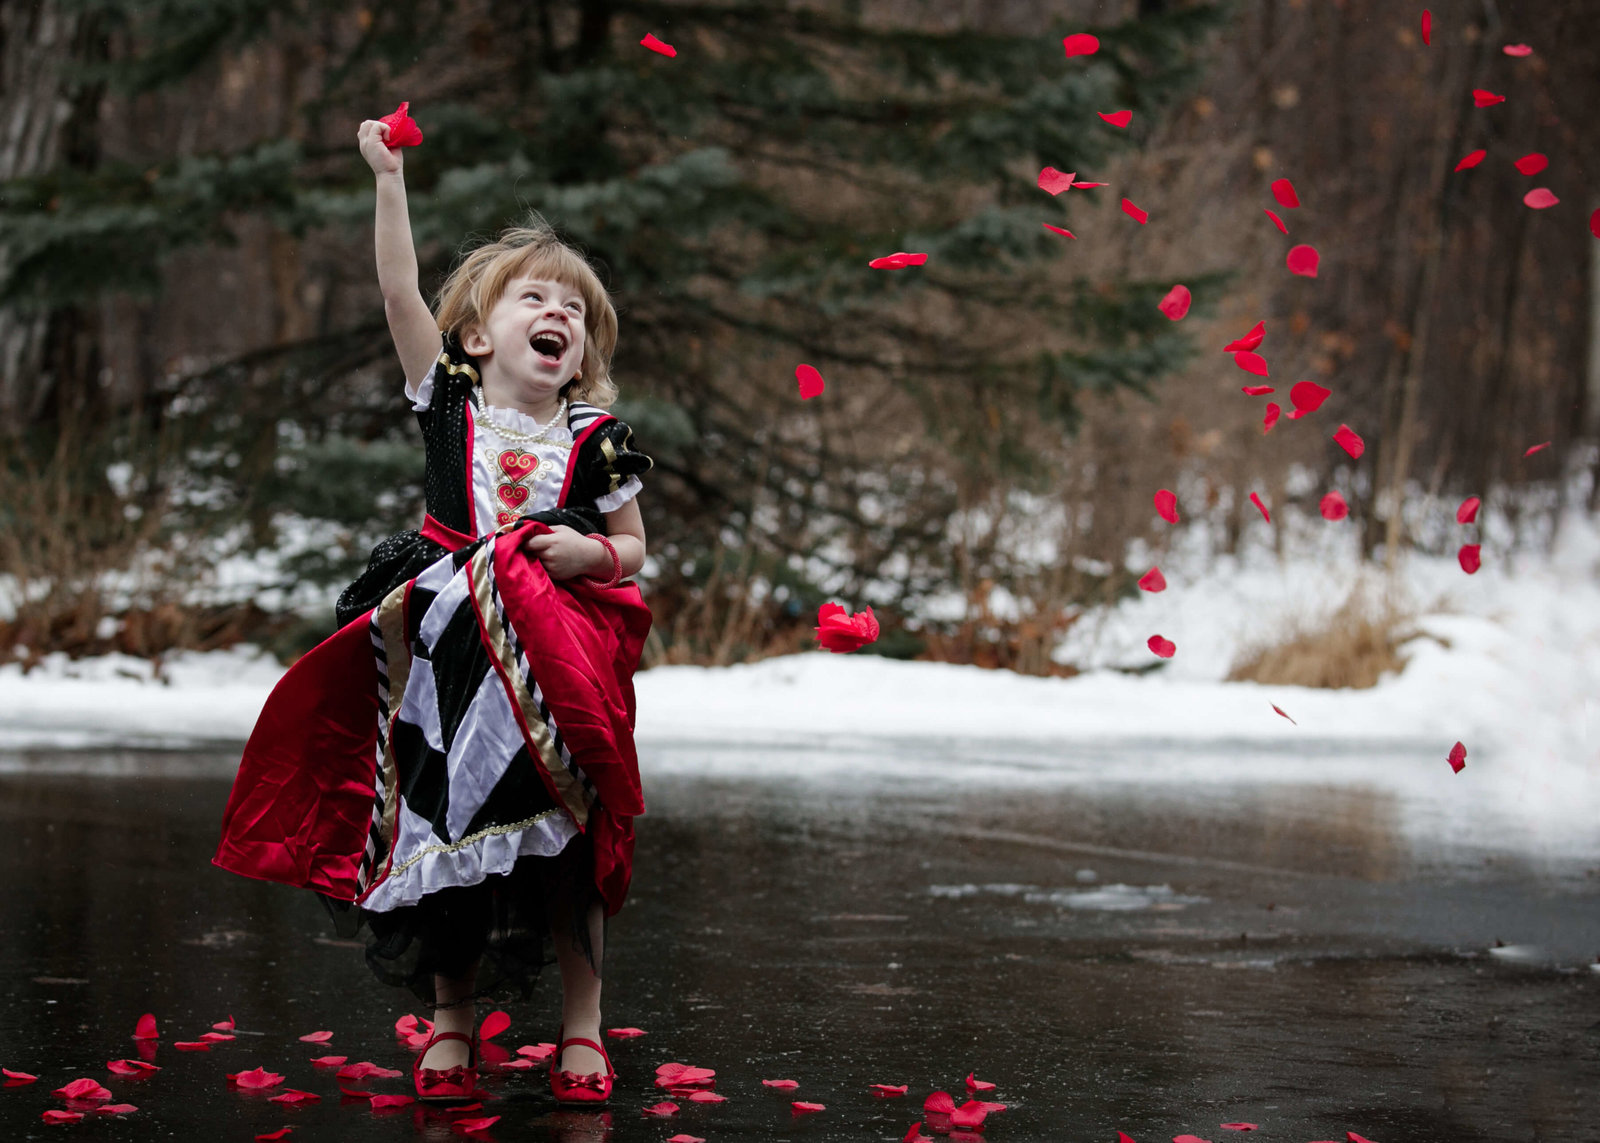 Themed fairytale photos for children in Cleveland